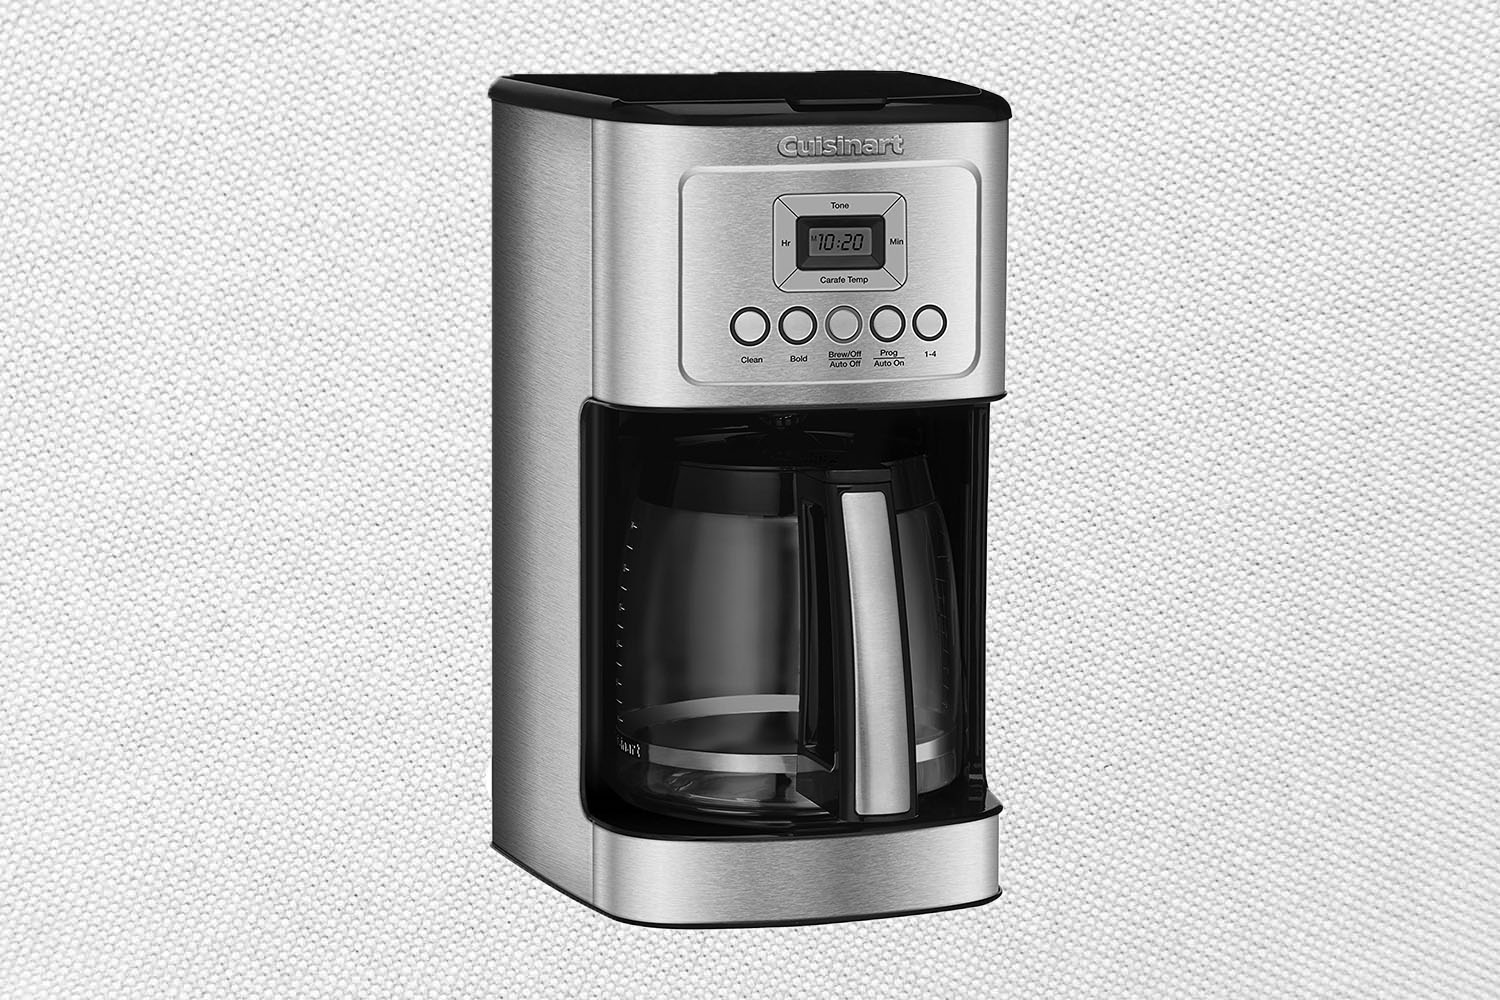 A Cuisinart Perfectemp 14 Cup Programmable Coffemaker on a gray background